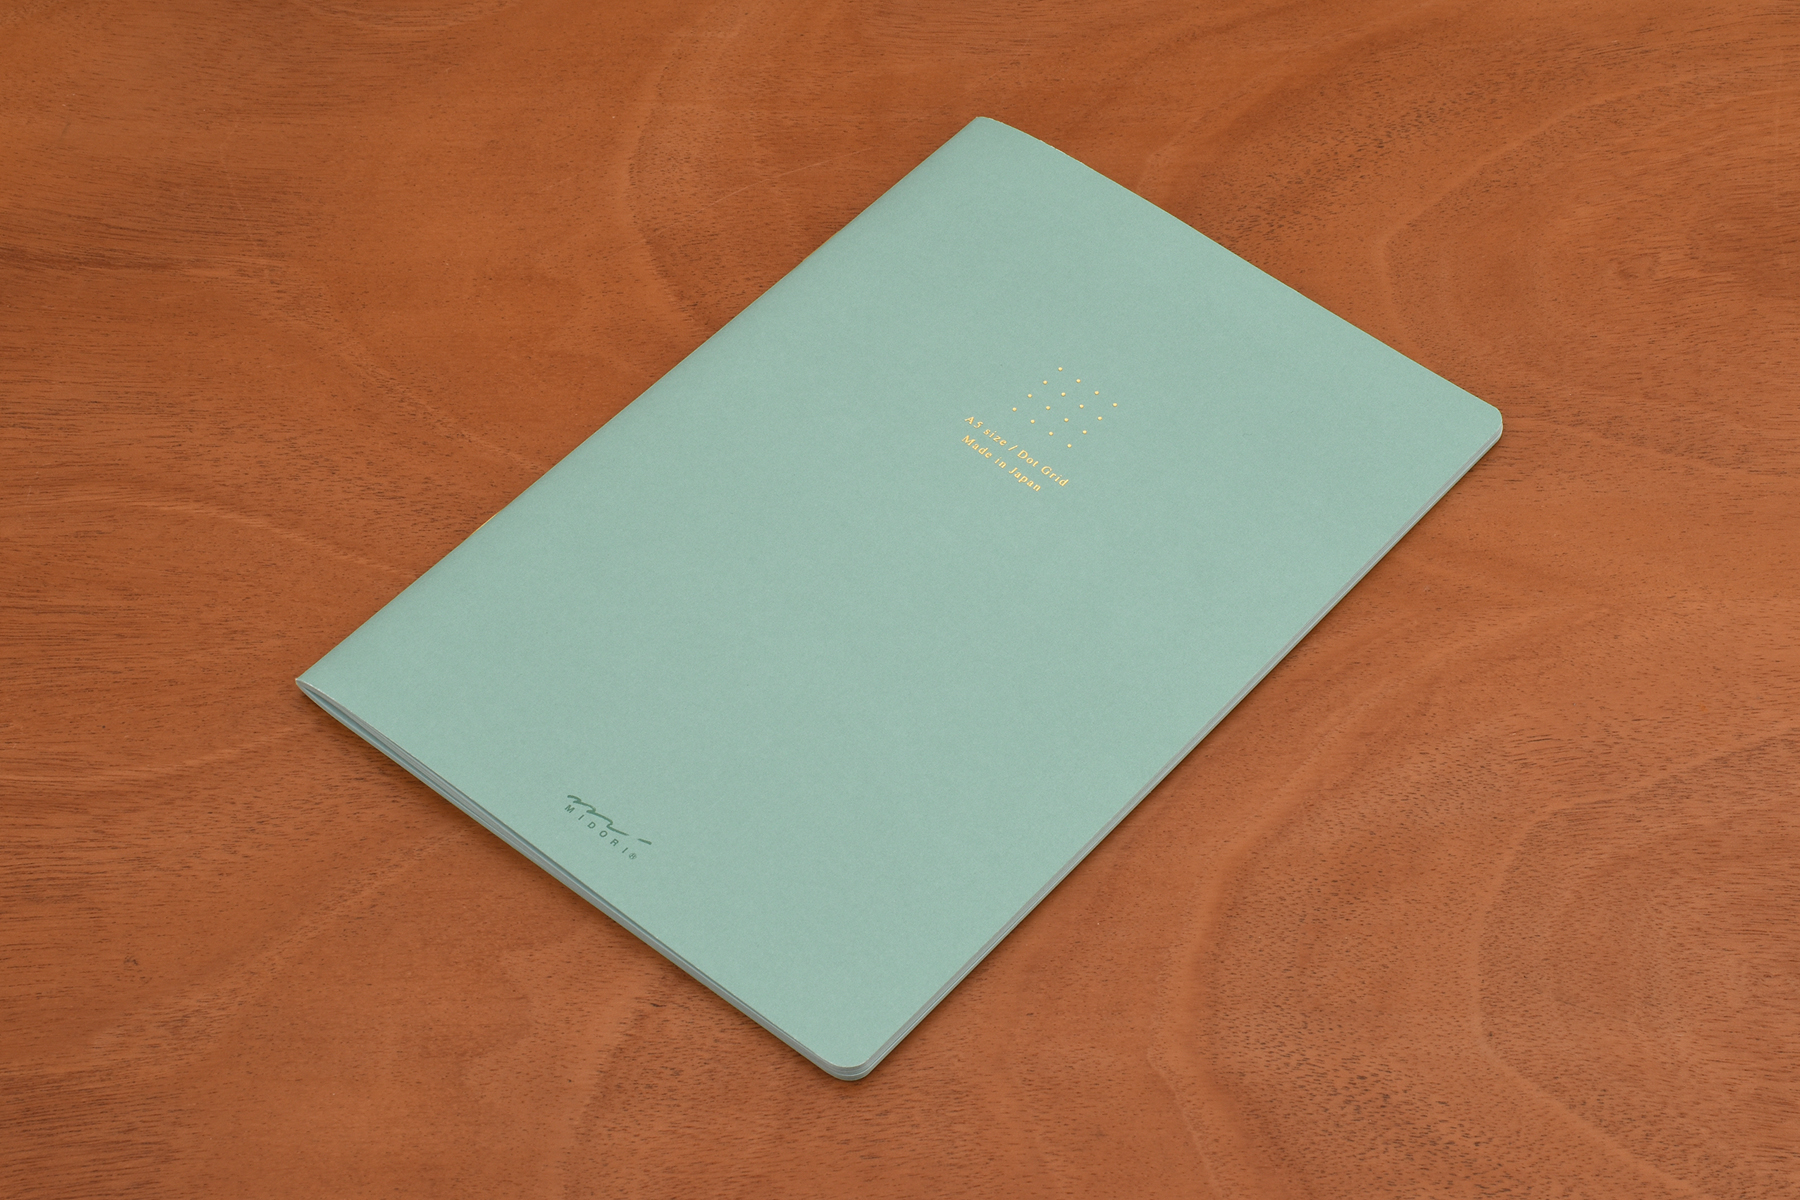 Whe Midori Soft Color Paper Notebook features pastel paper with matching covers.